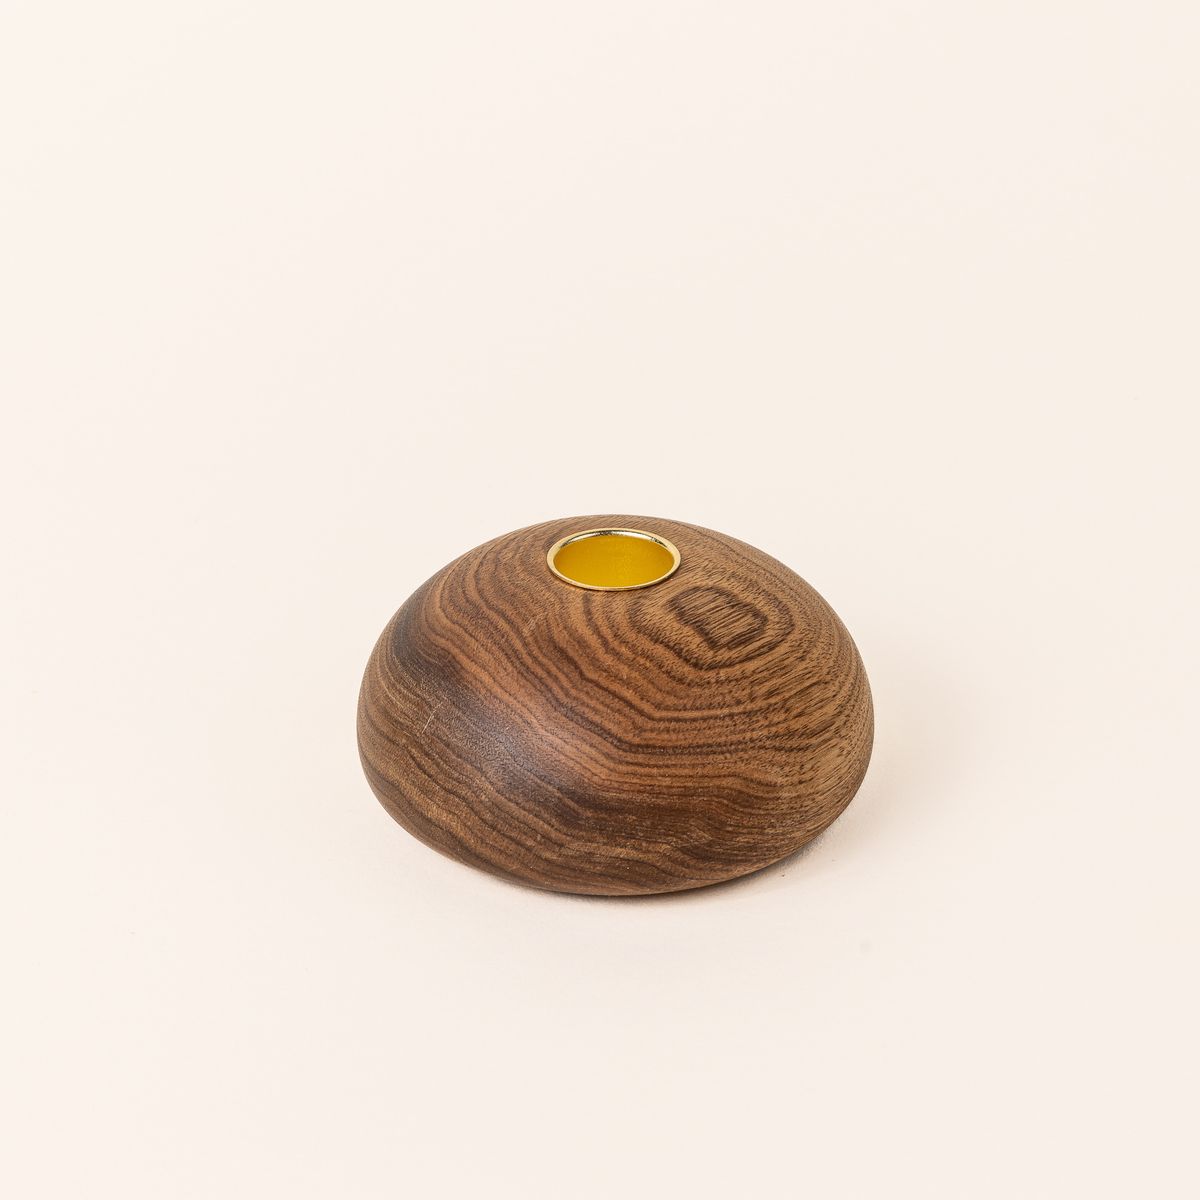 A butternut wood candle holder that is shaped like a small dome with a gold carved circle on top to hold the candle